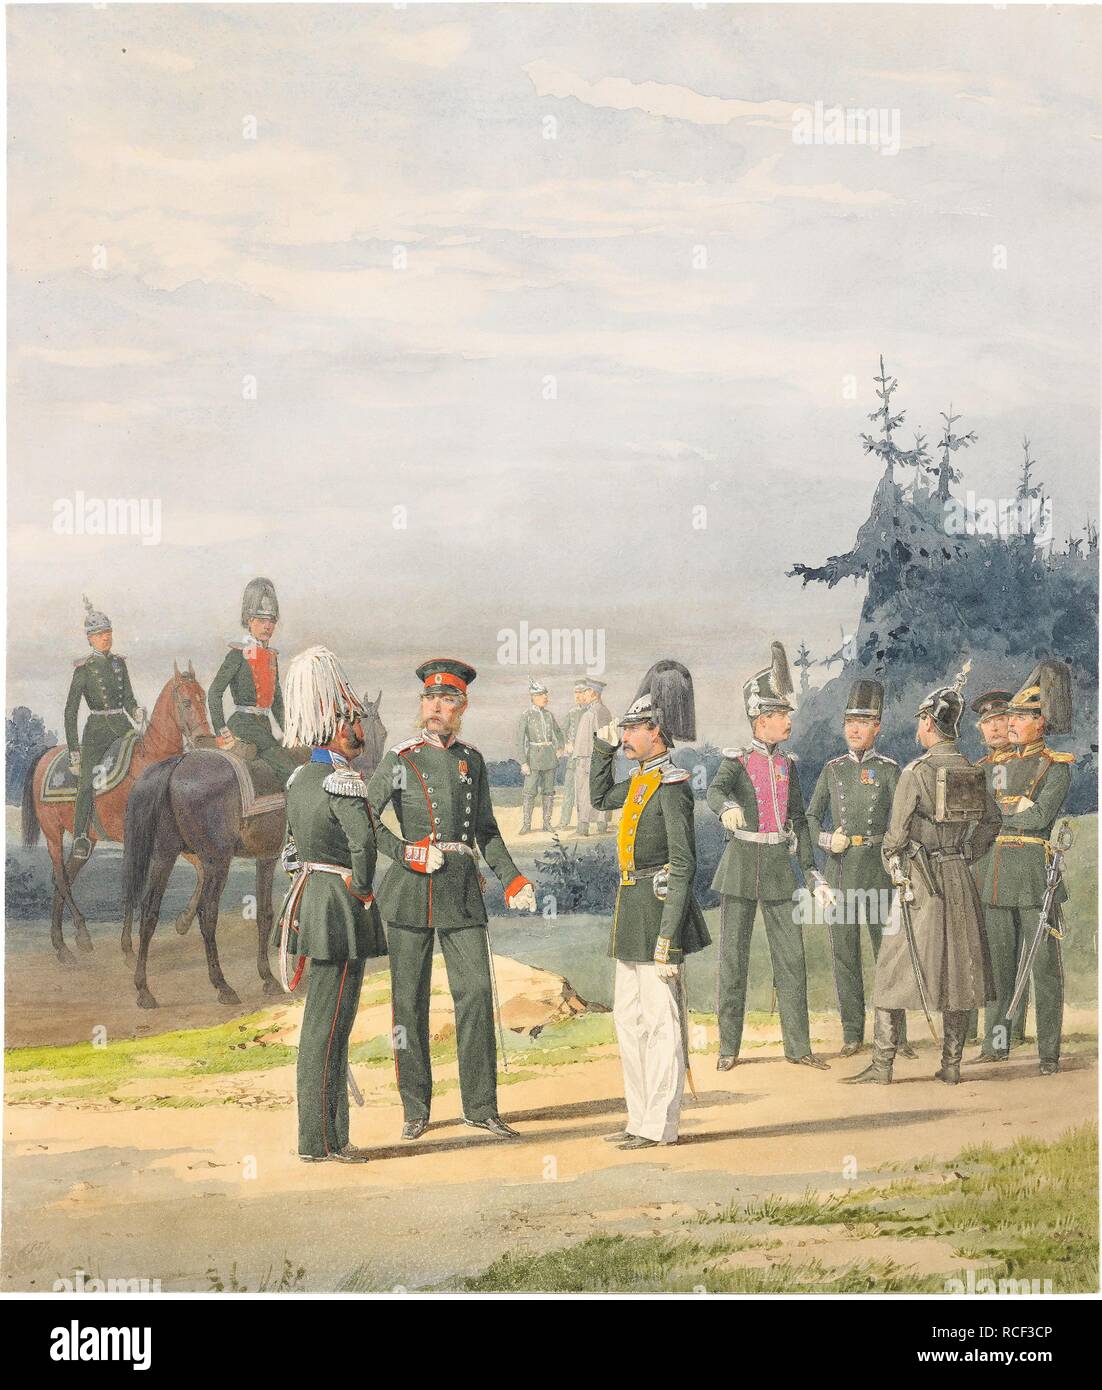 Officers from Uhlan Regiment. Museum: PRIVATE COLLECTION. Author: Balashov, Pyotr Ivanovich. Stock Photo